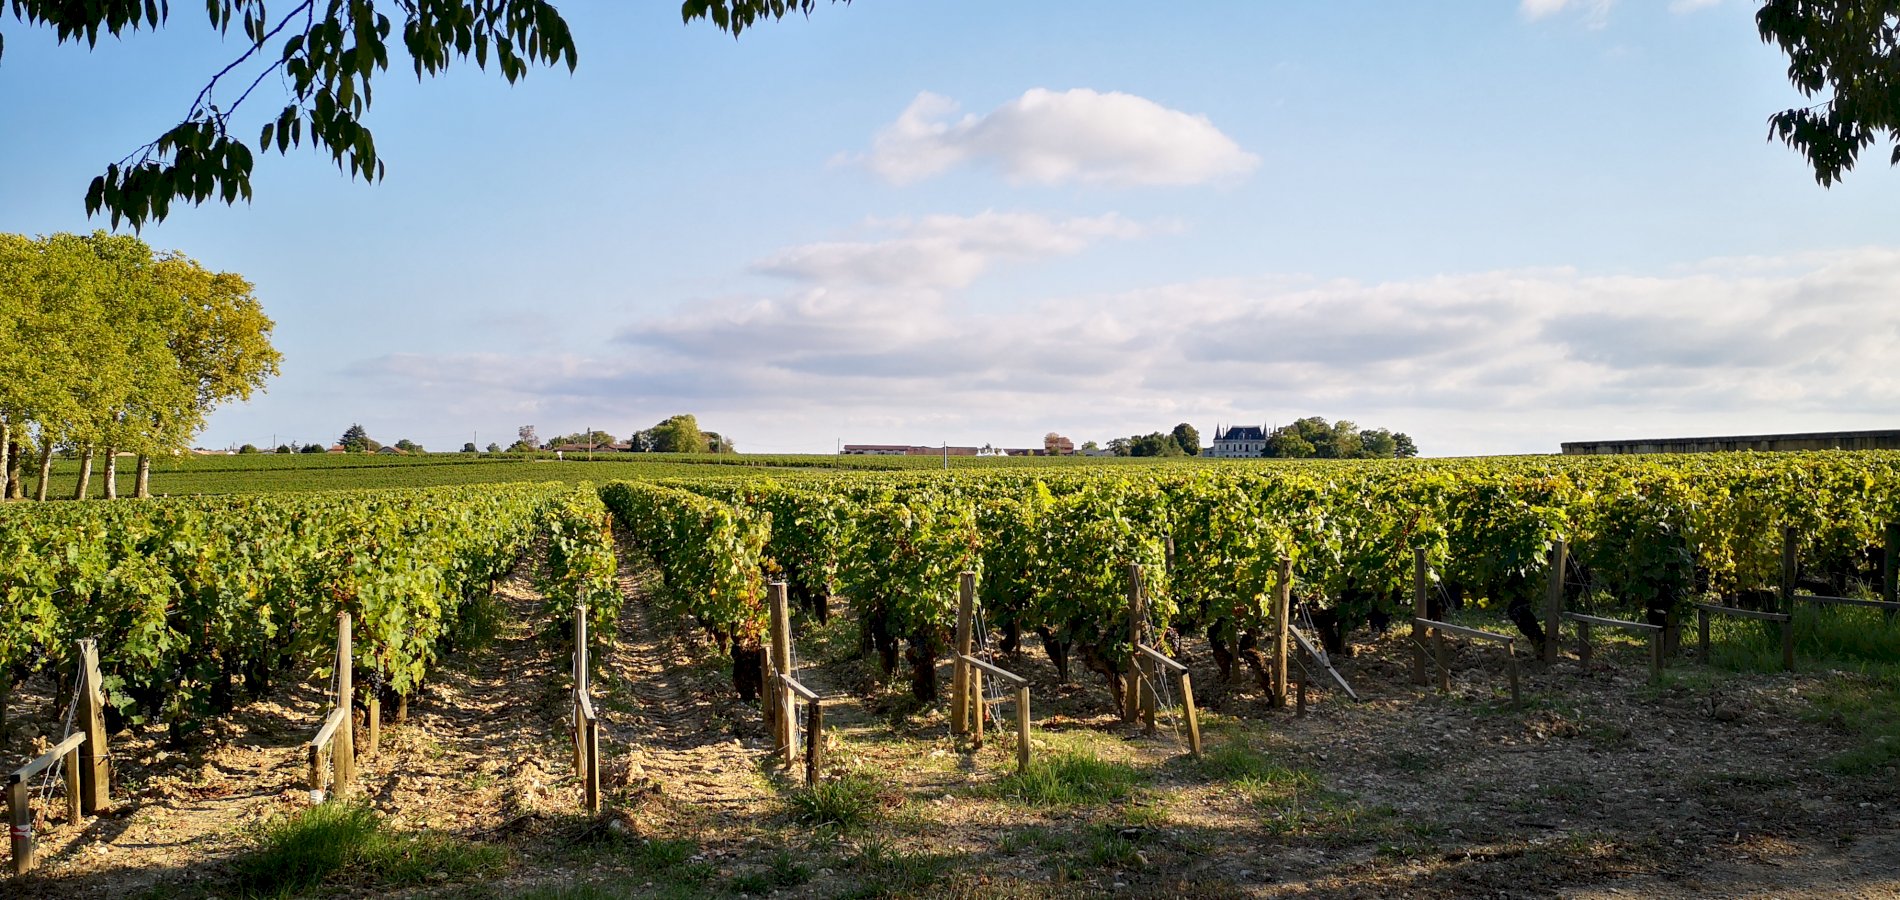 Ophorus Tours - Médoc Wine Tour Small Group Private Full Day Trip from Saint Emilion